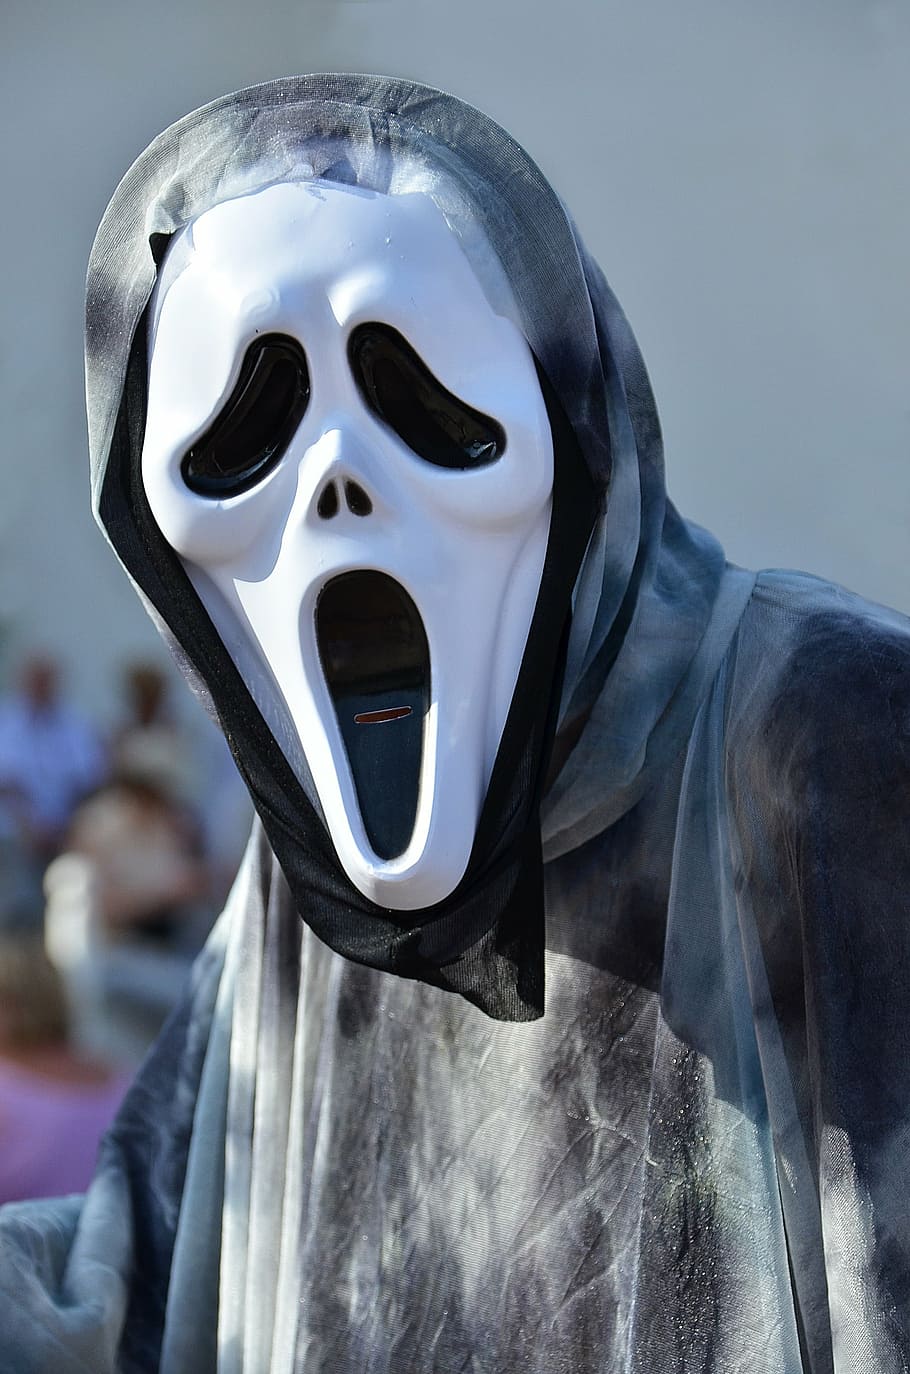 person, wearing, ghostface mask, haloween, mask, ghost, fear, skull, yell, film